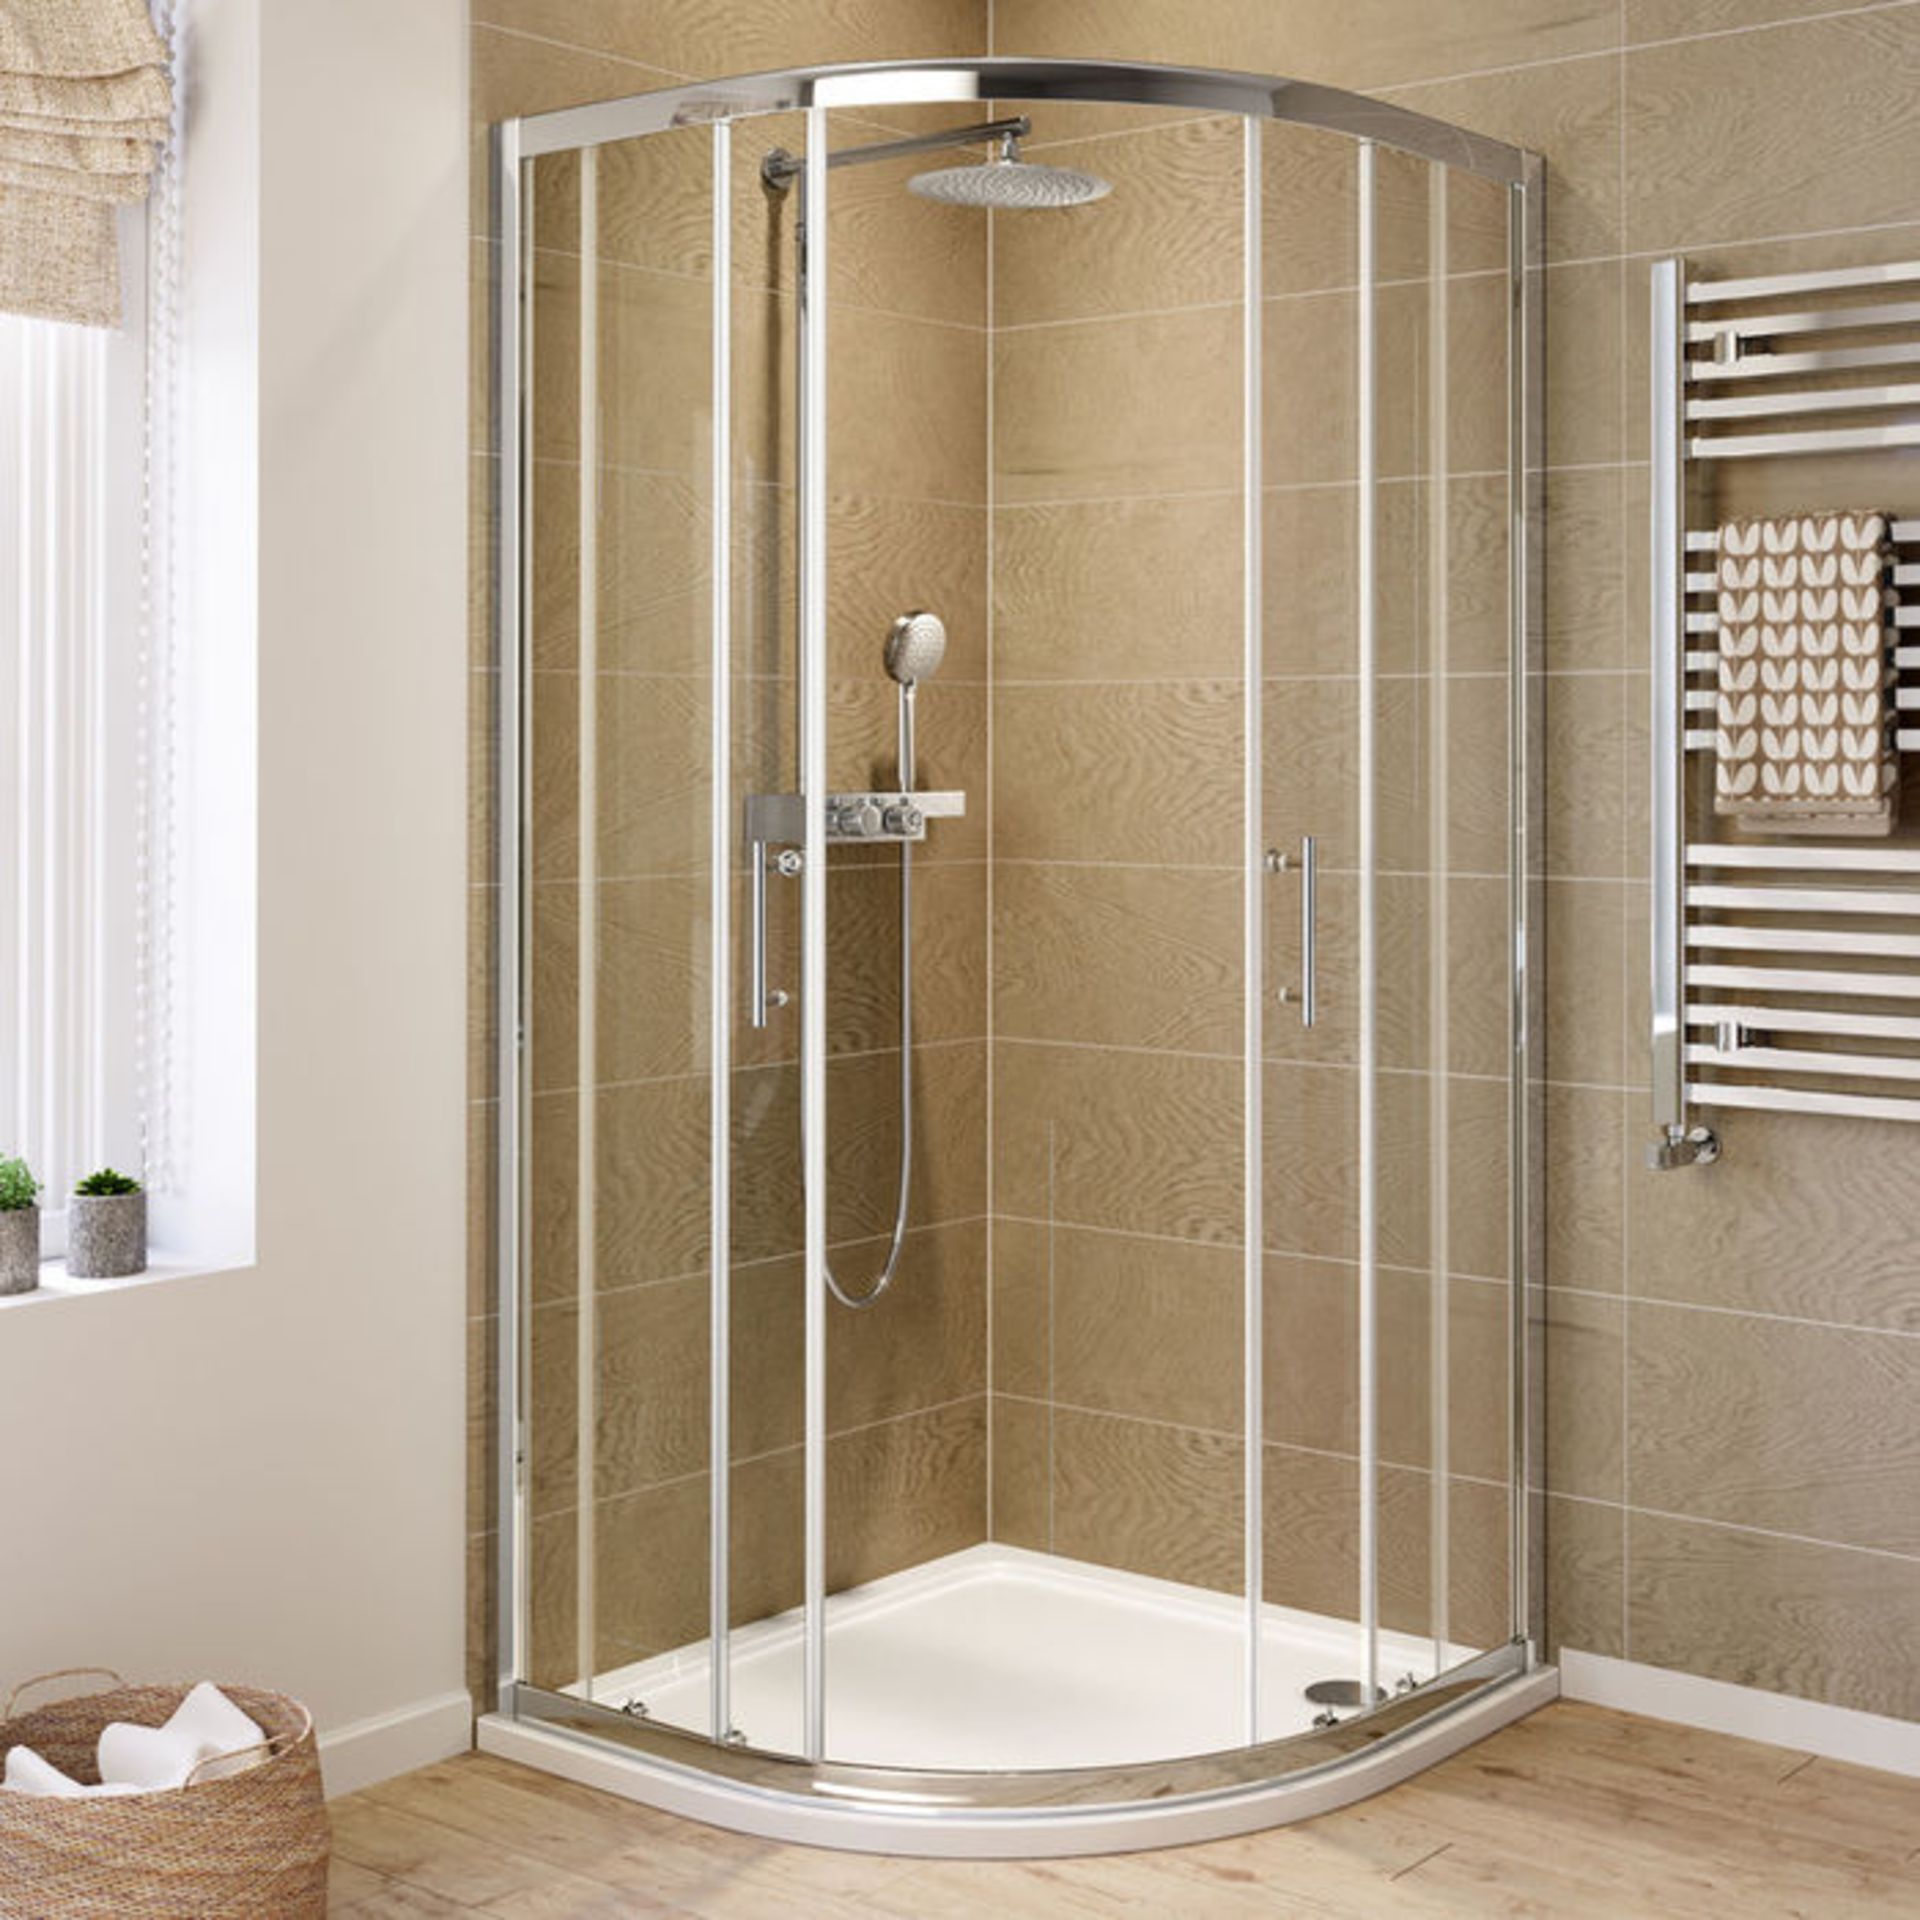 (L52) 900x900mm - Elements Quadrant Shower Enclosure RRP £199.99 4mm Safety Glass Fully waterproof - Image 2 of 2